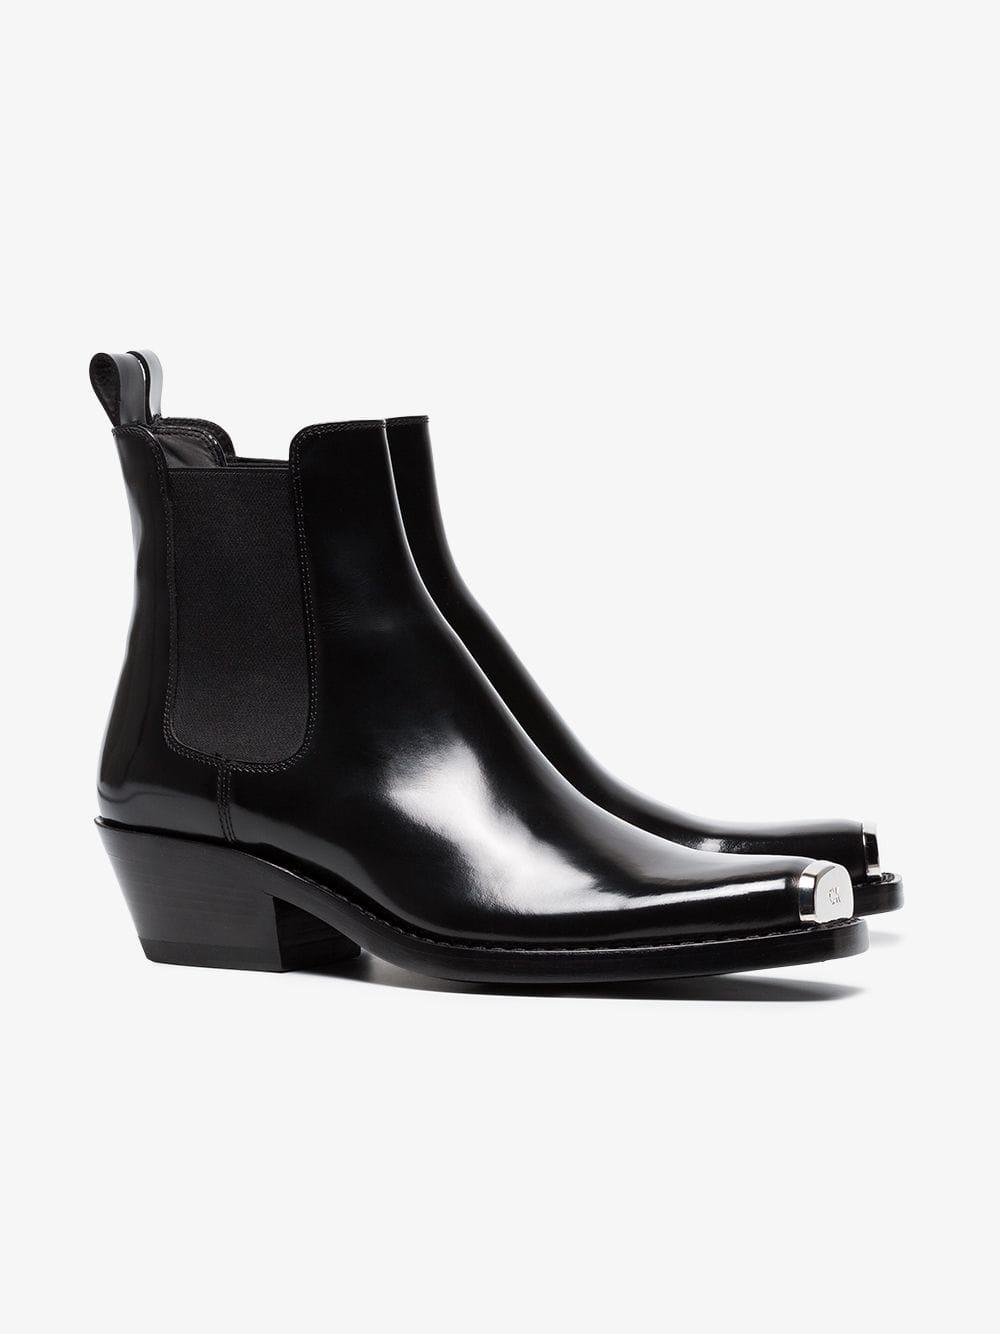 CALVIN KLEIN 205W39NYC Leather Claire 40 Western Ankle Boots in Black | Lyst